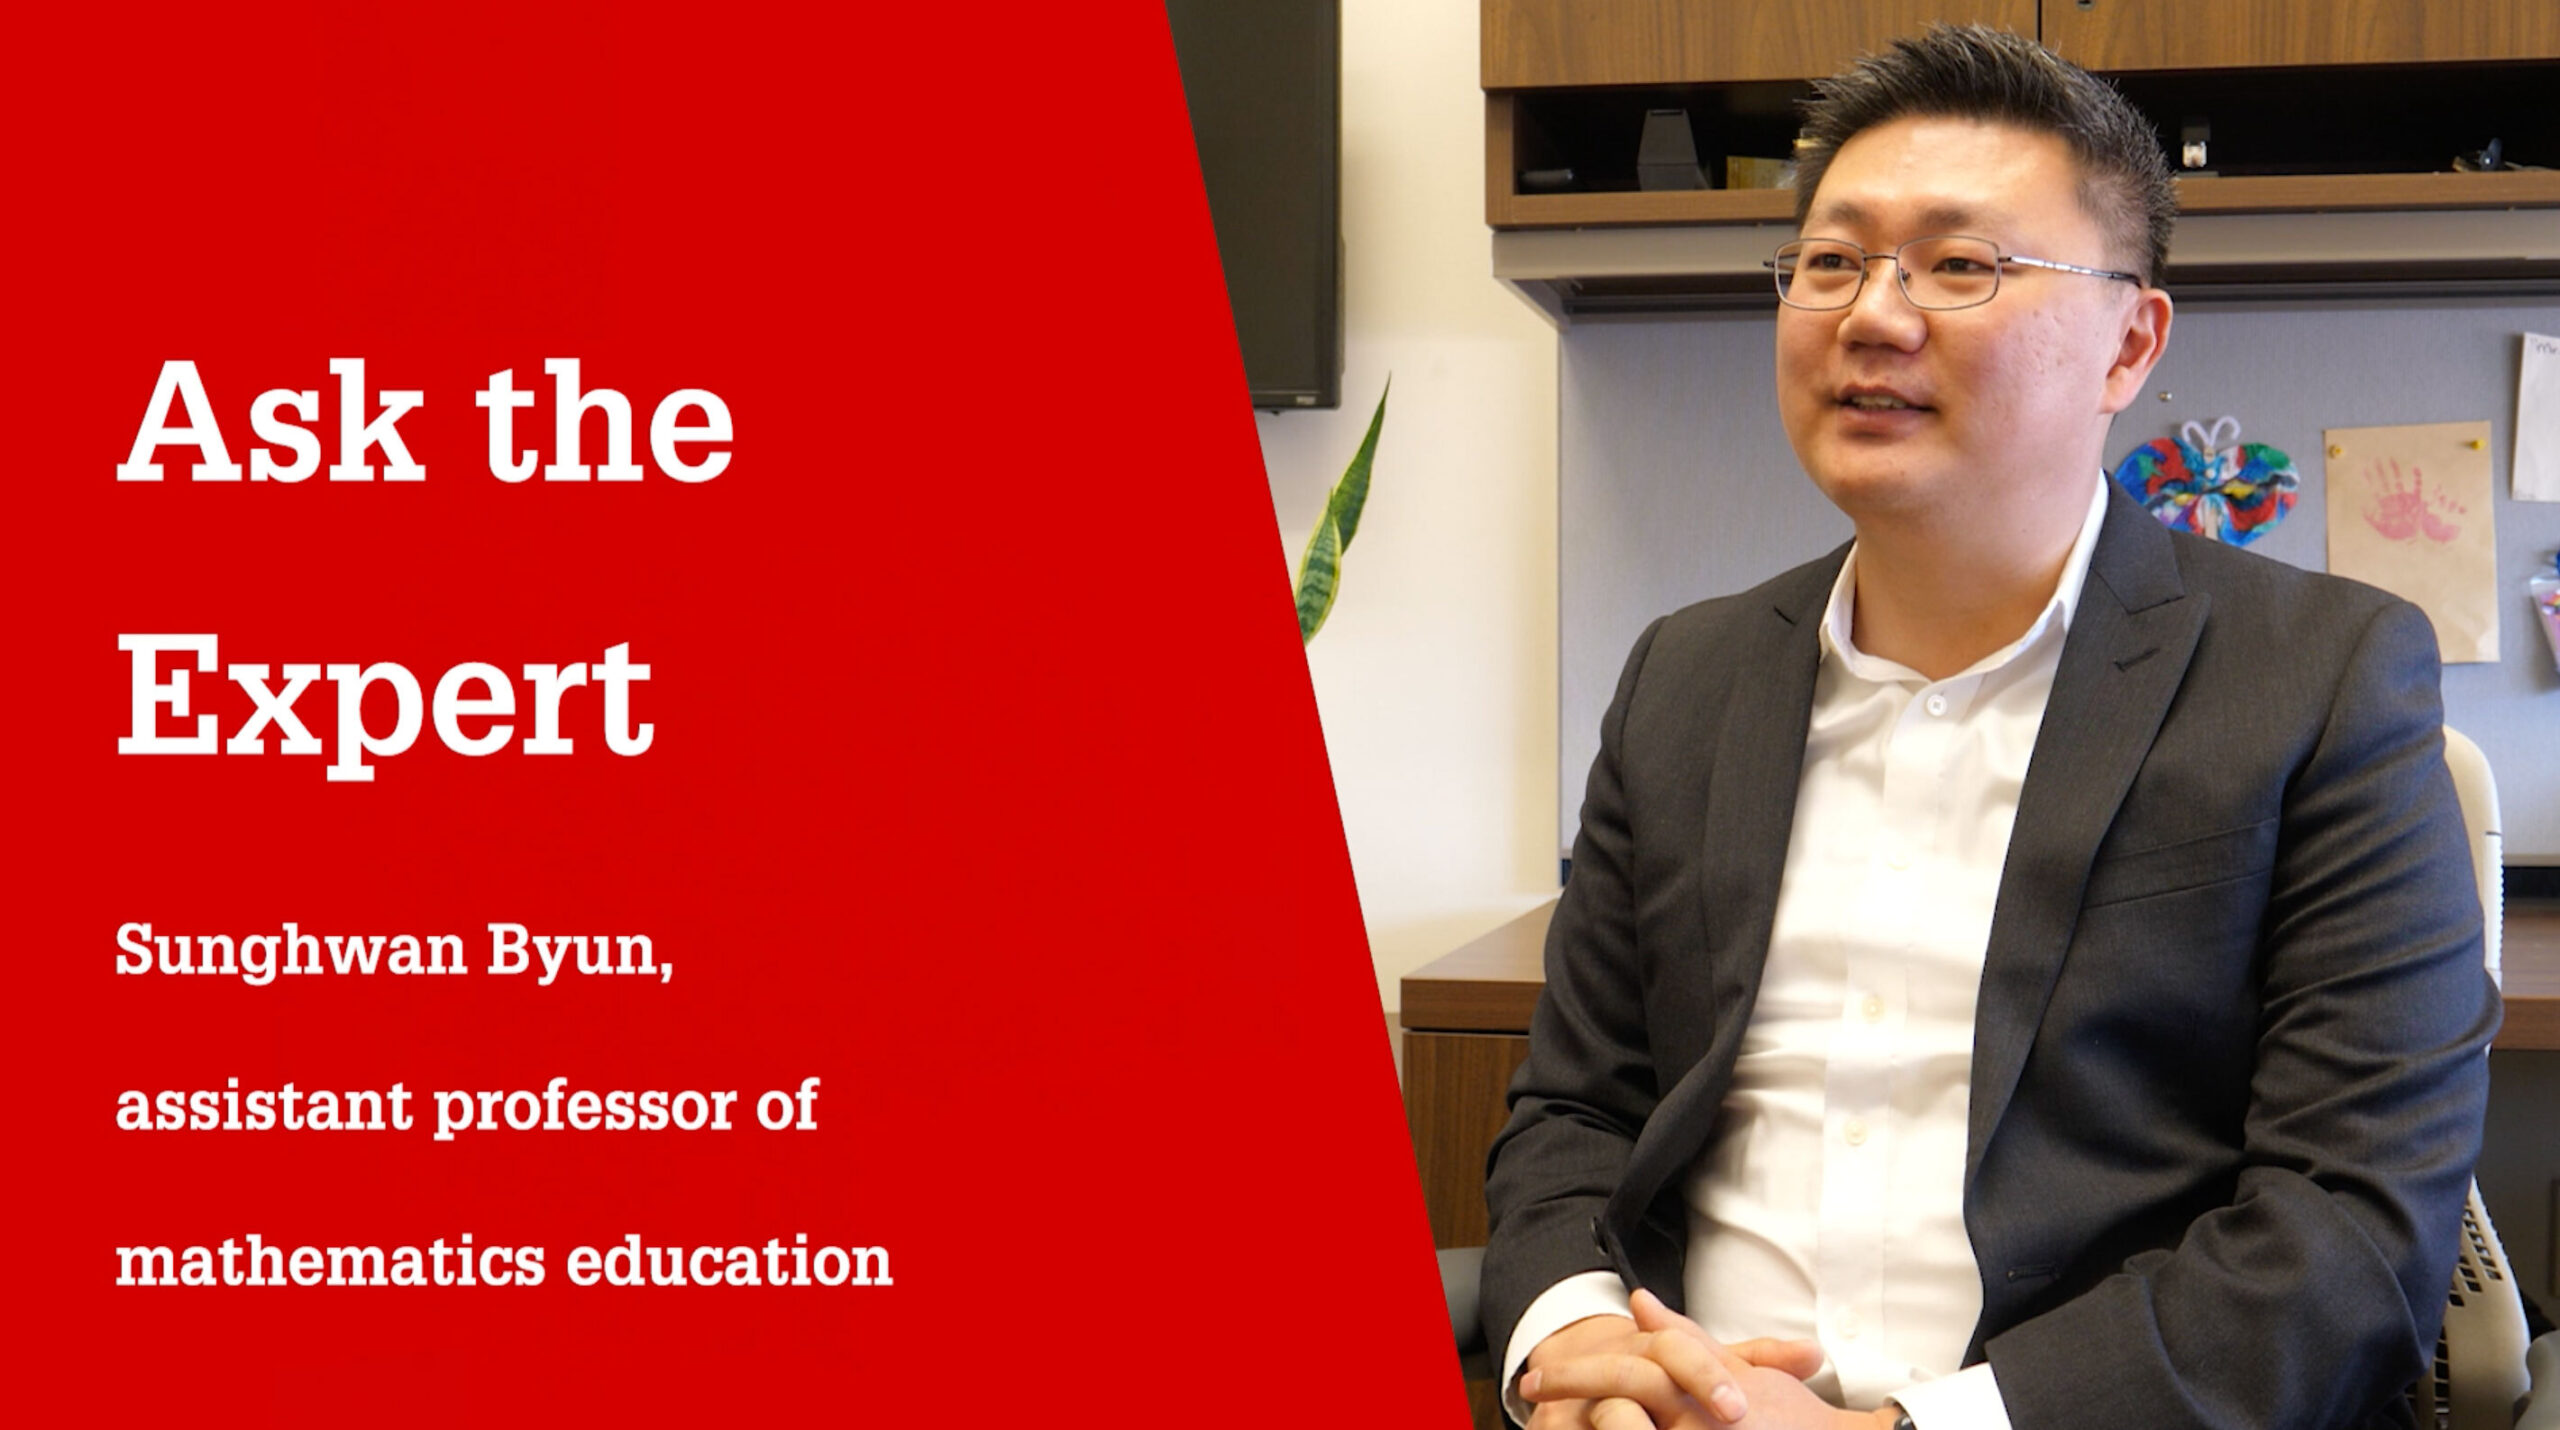 NC State College of Education Assistant Professor Sunghwan Byun